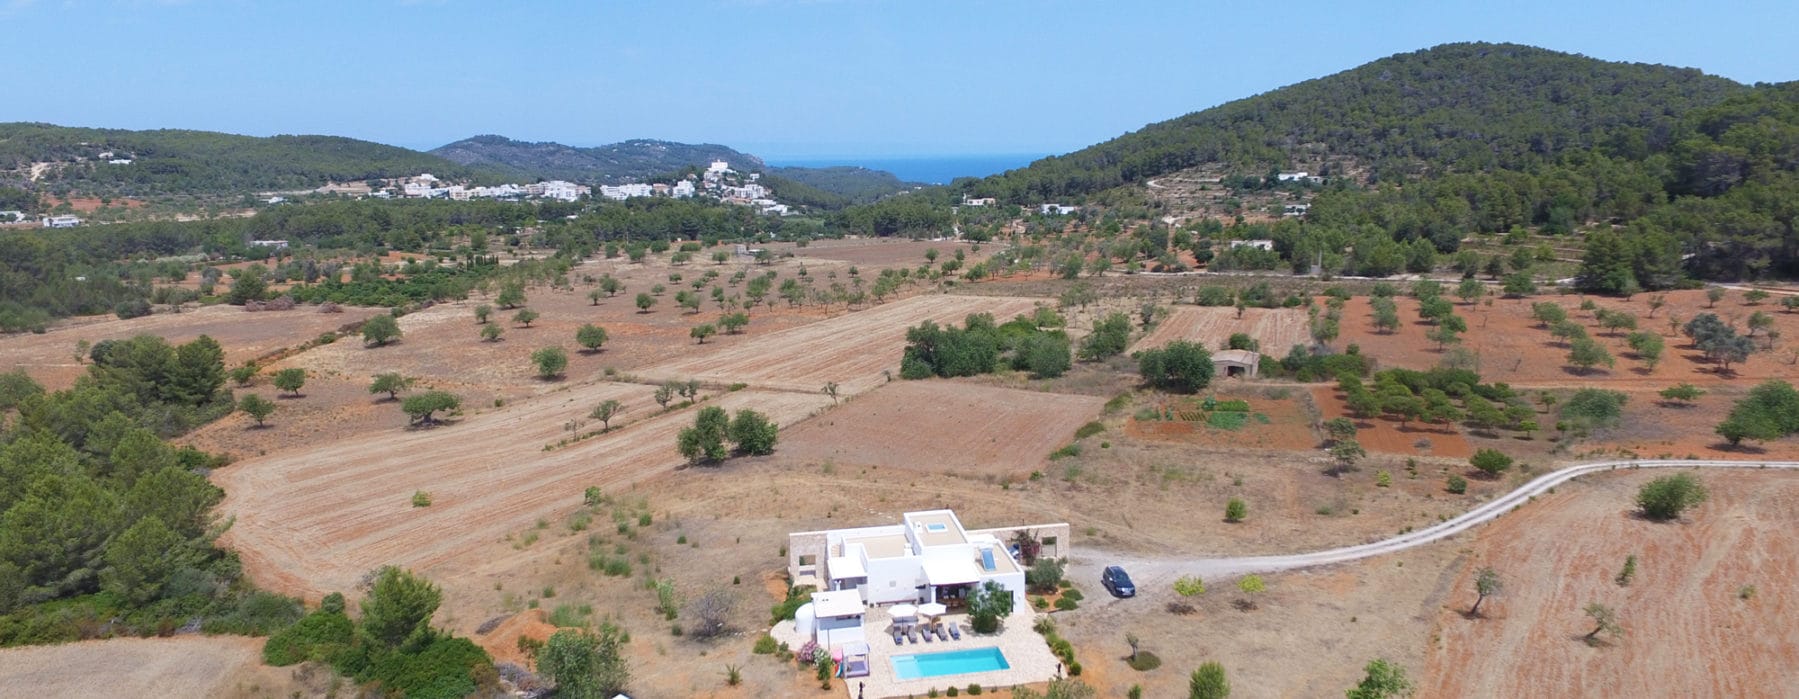 Drone picture from high above of finca emerged in flat countryside